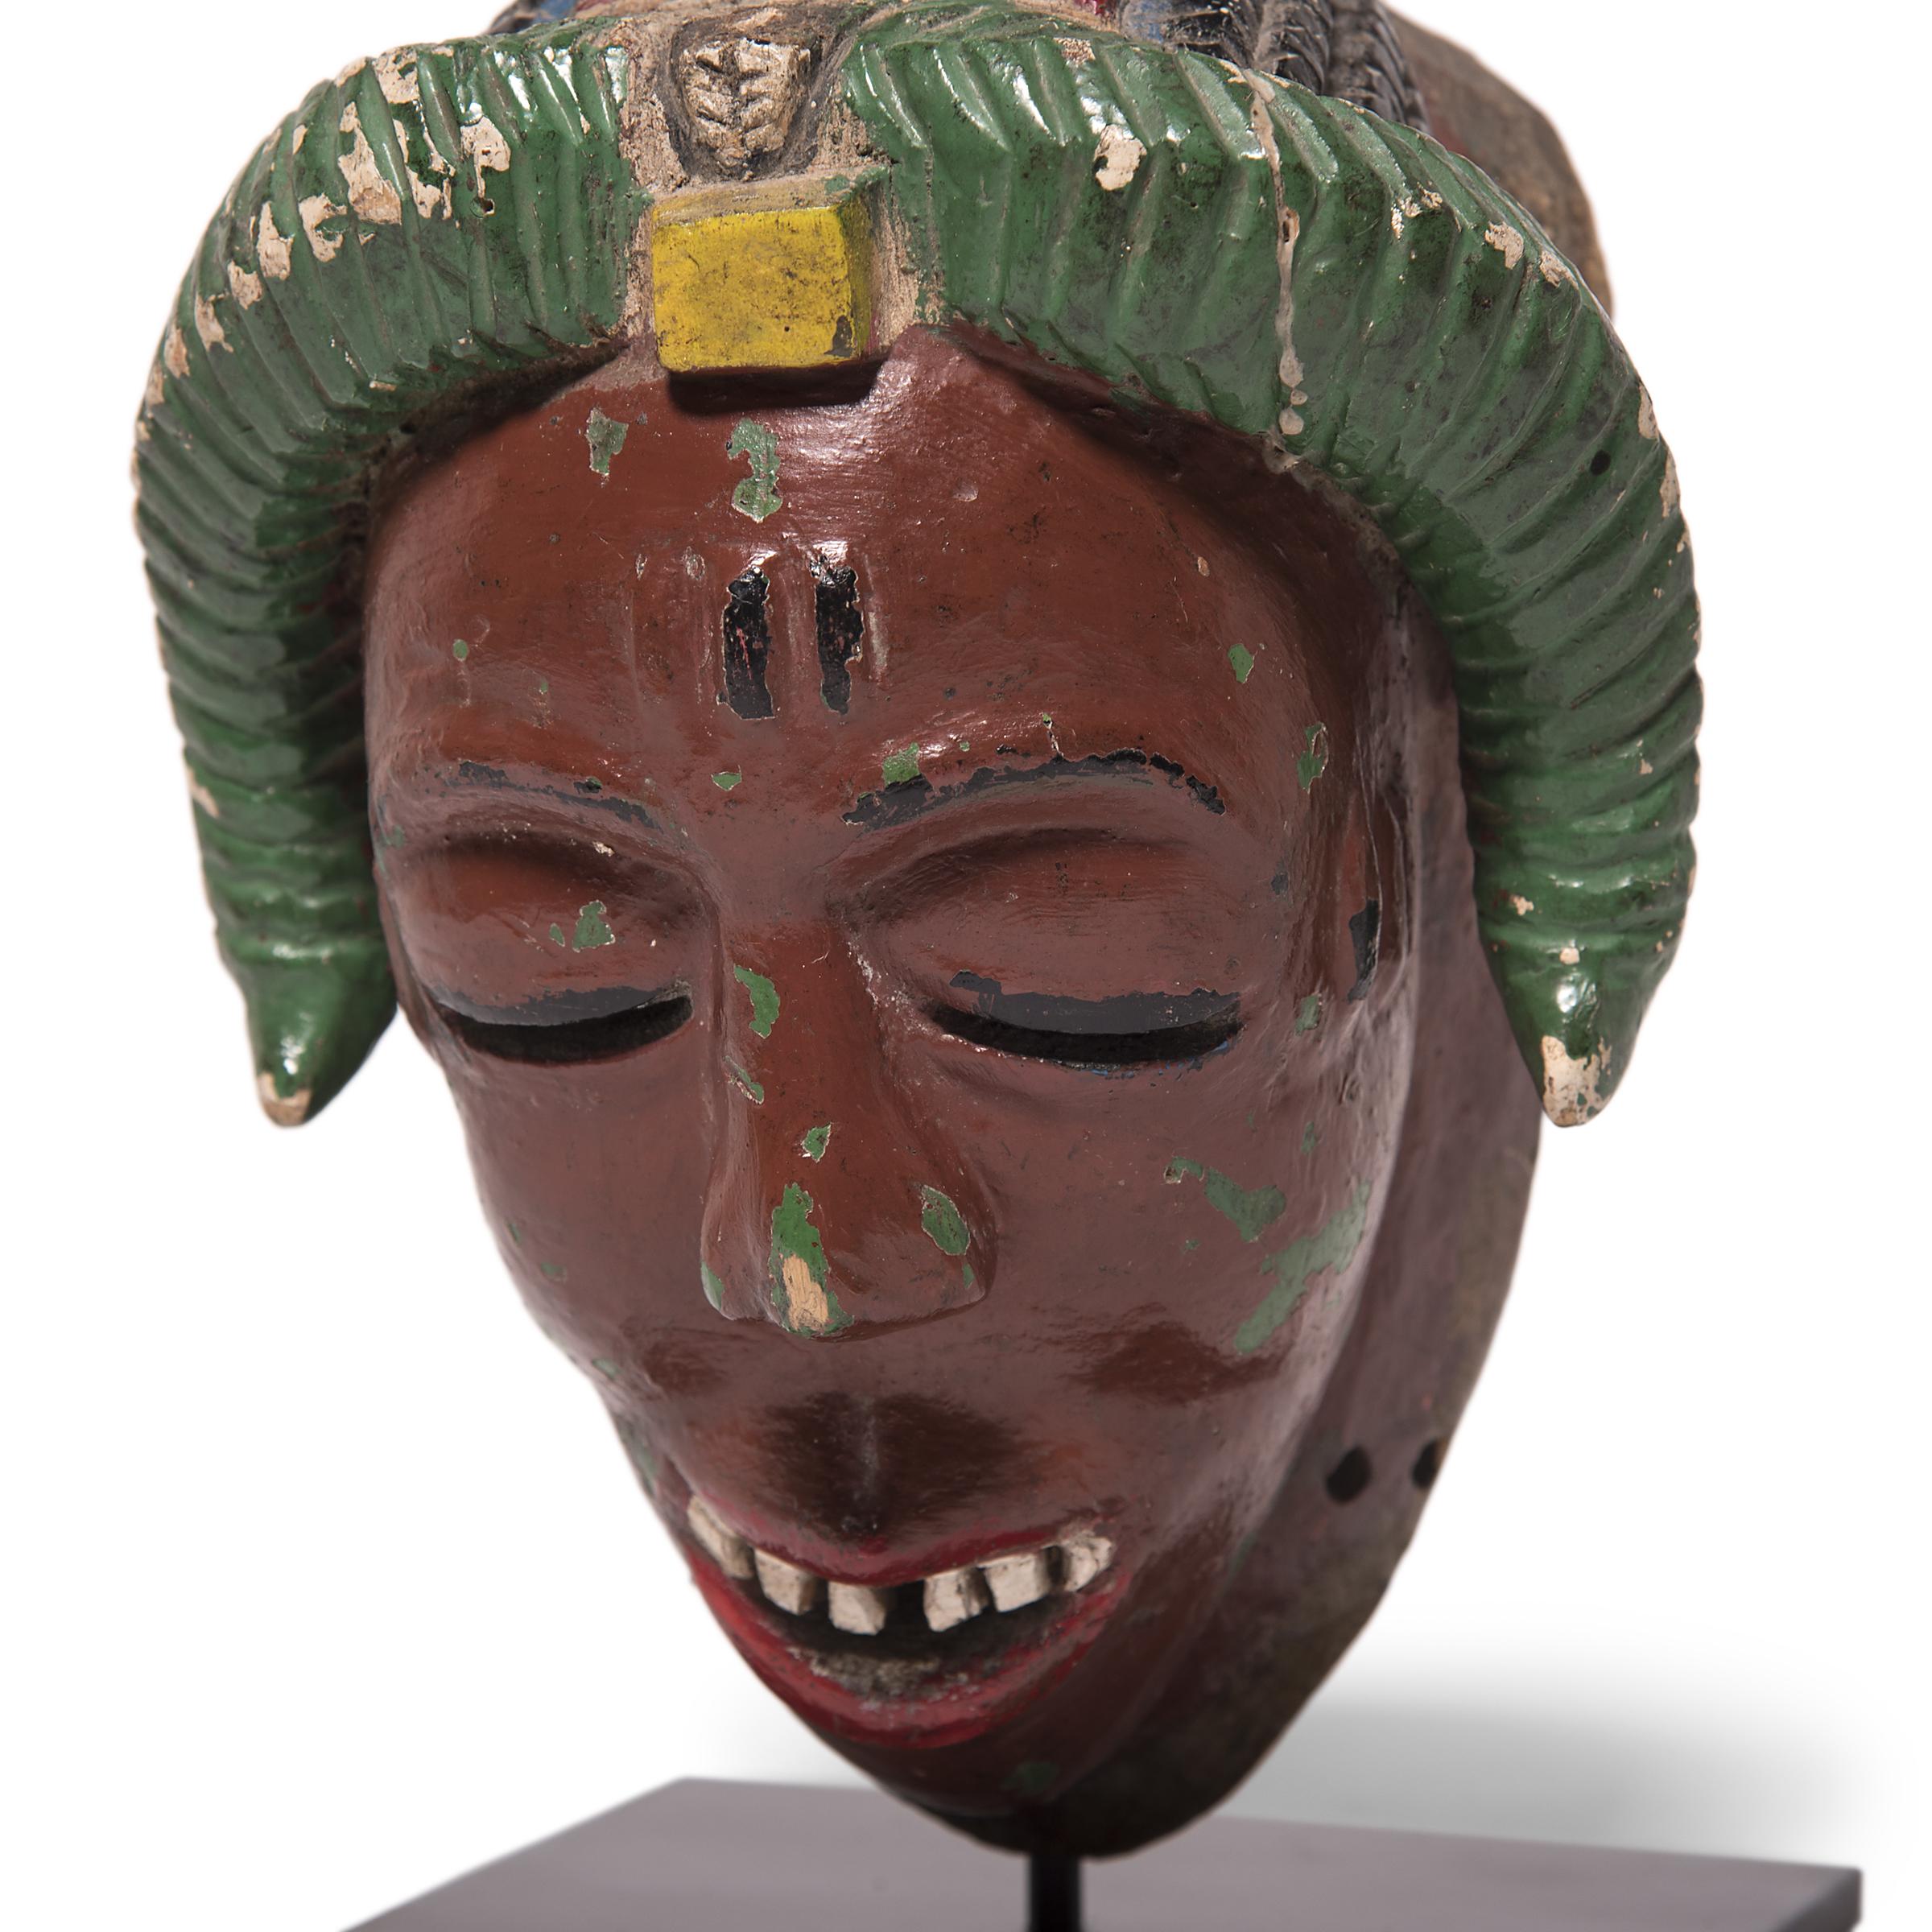 To ward off evil and exert positive influences on the spirit world, the Baule people engage in a daylong masquerade known as the Goli. A sequence of four masks are donned during the performance, with the last and most important being the kpan, or